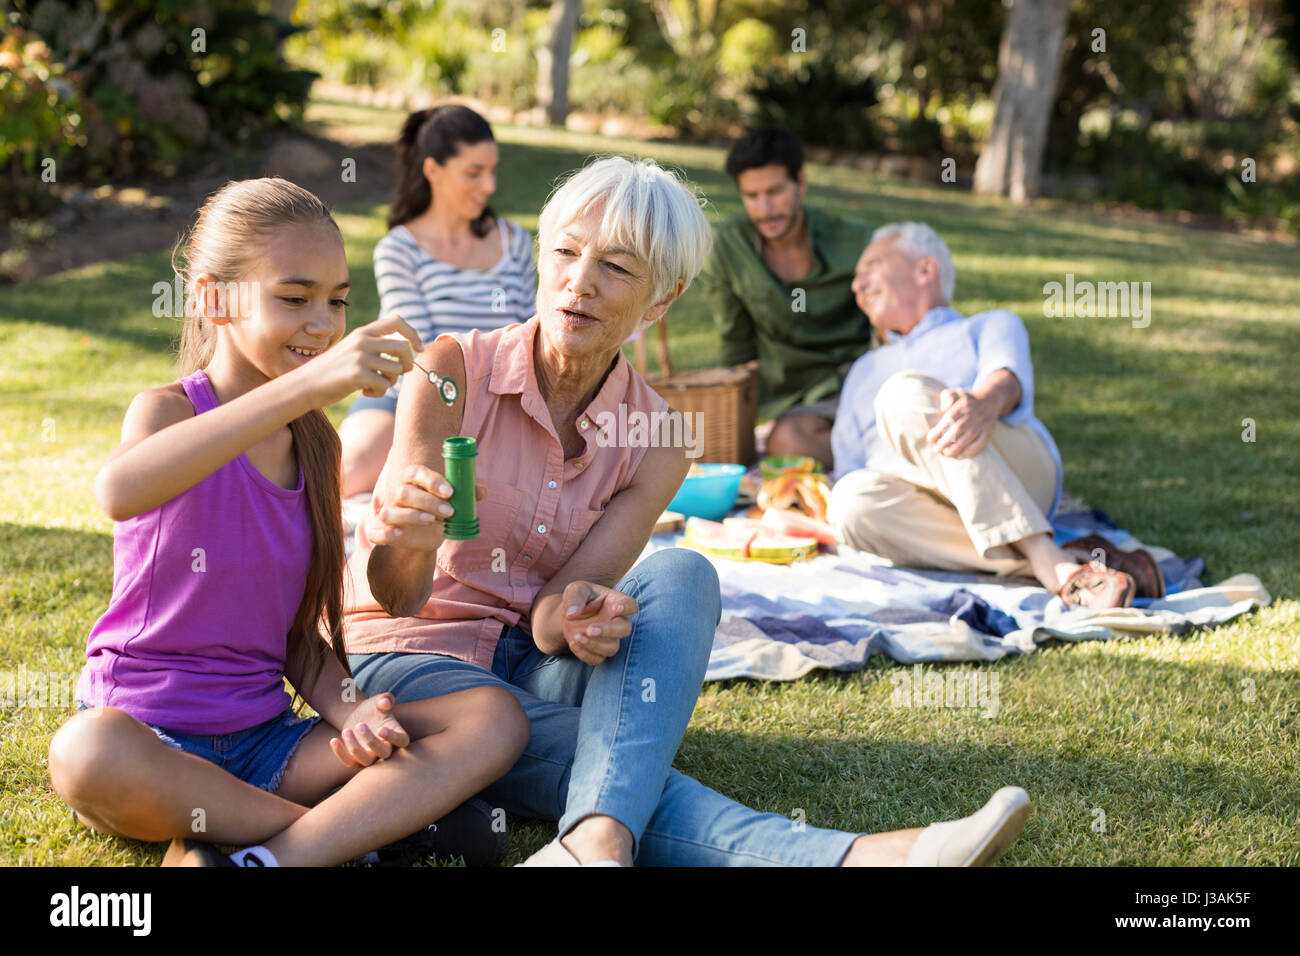 Grand mother looking at her granddaughter blowing bubbles in the park on a sunny day Stock Photo